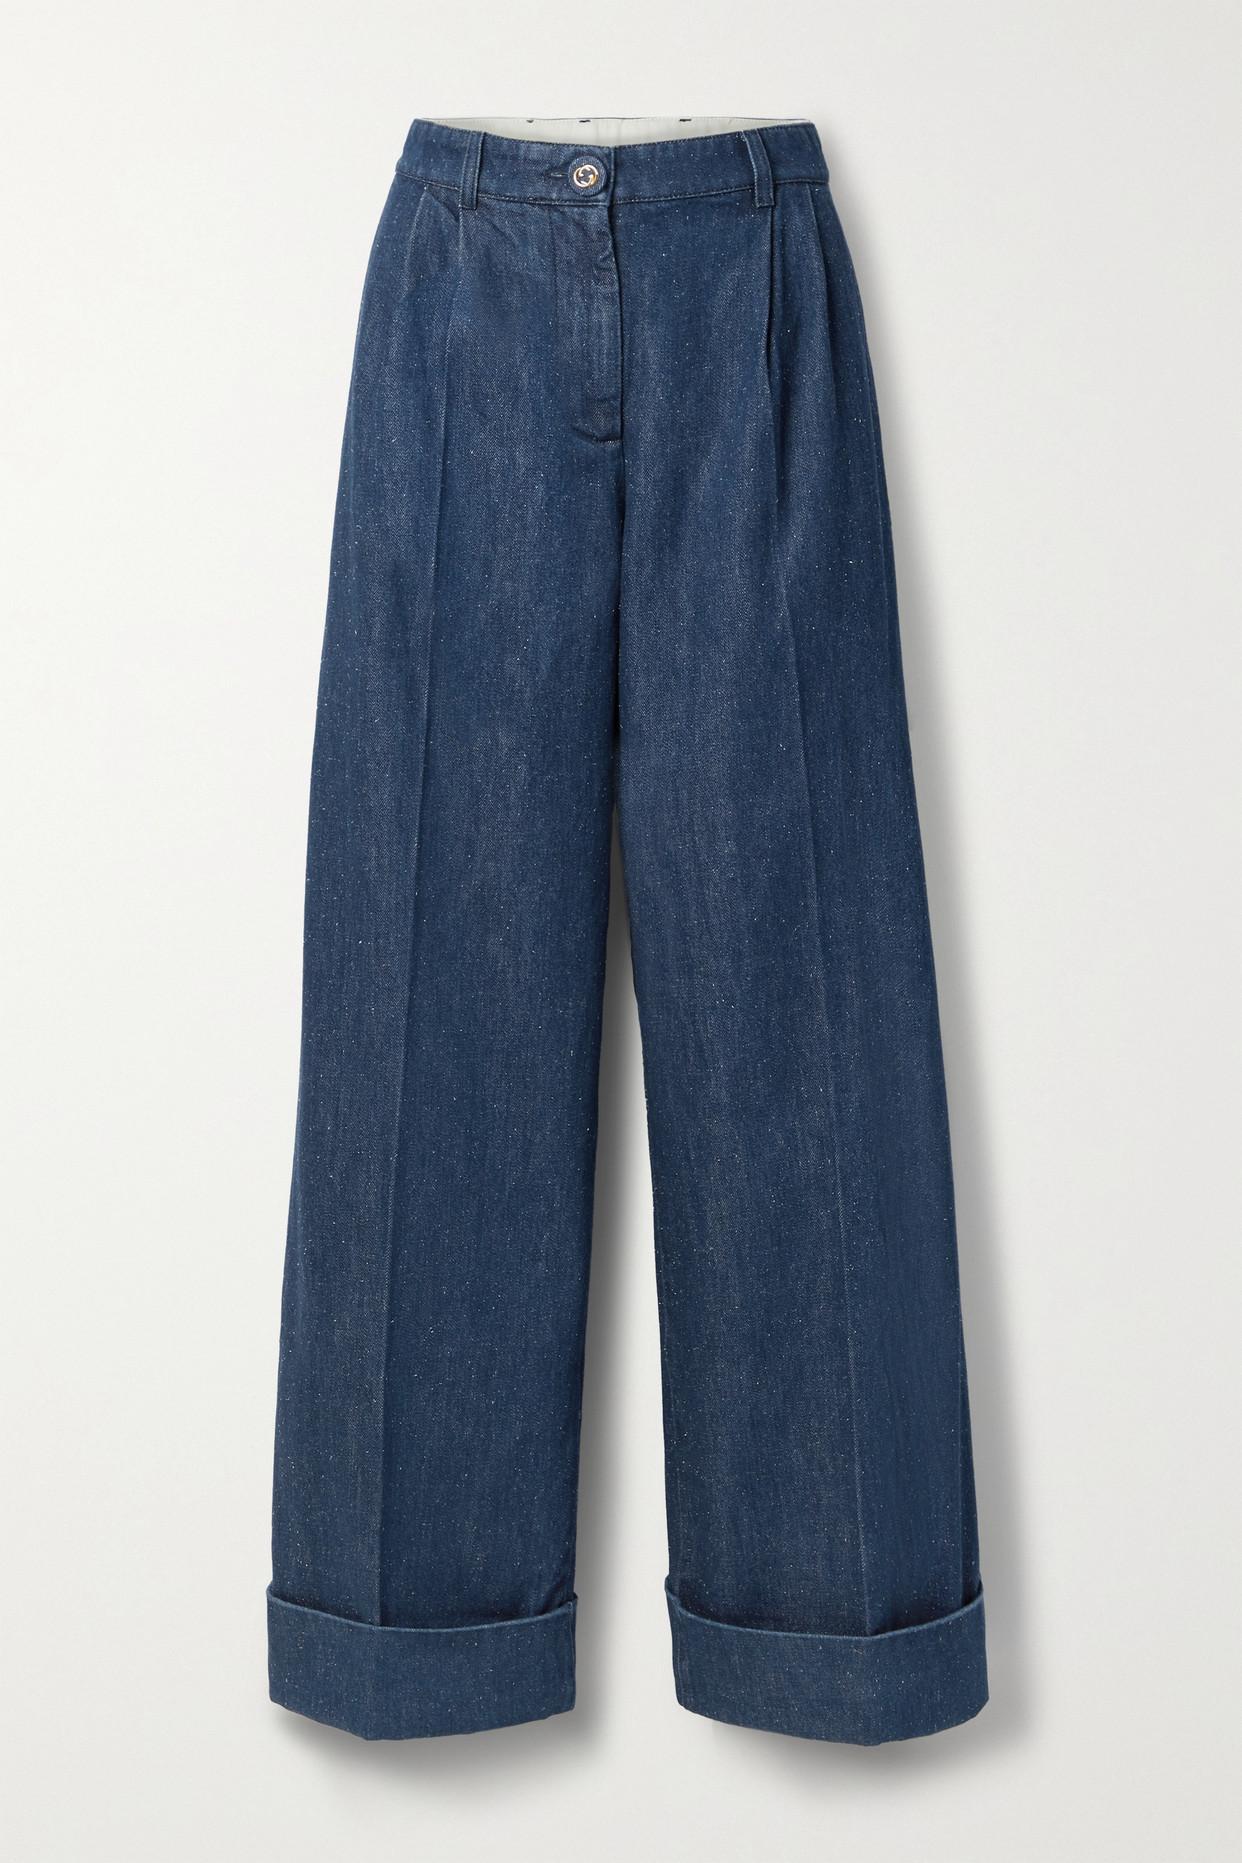 Gucci Pleated High-rise Wide-leg Jeans in Blue | Lyst